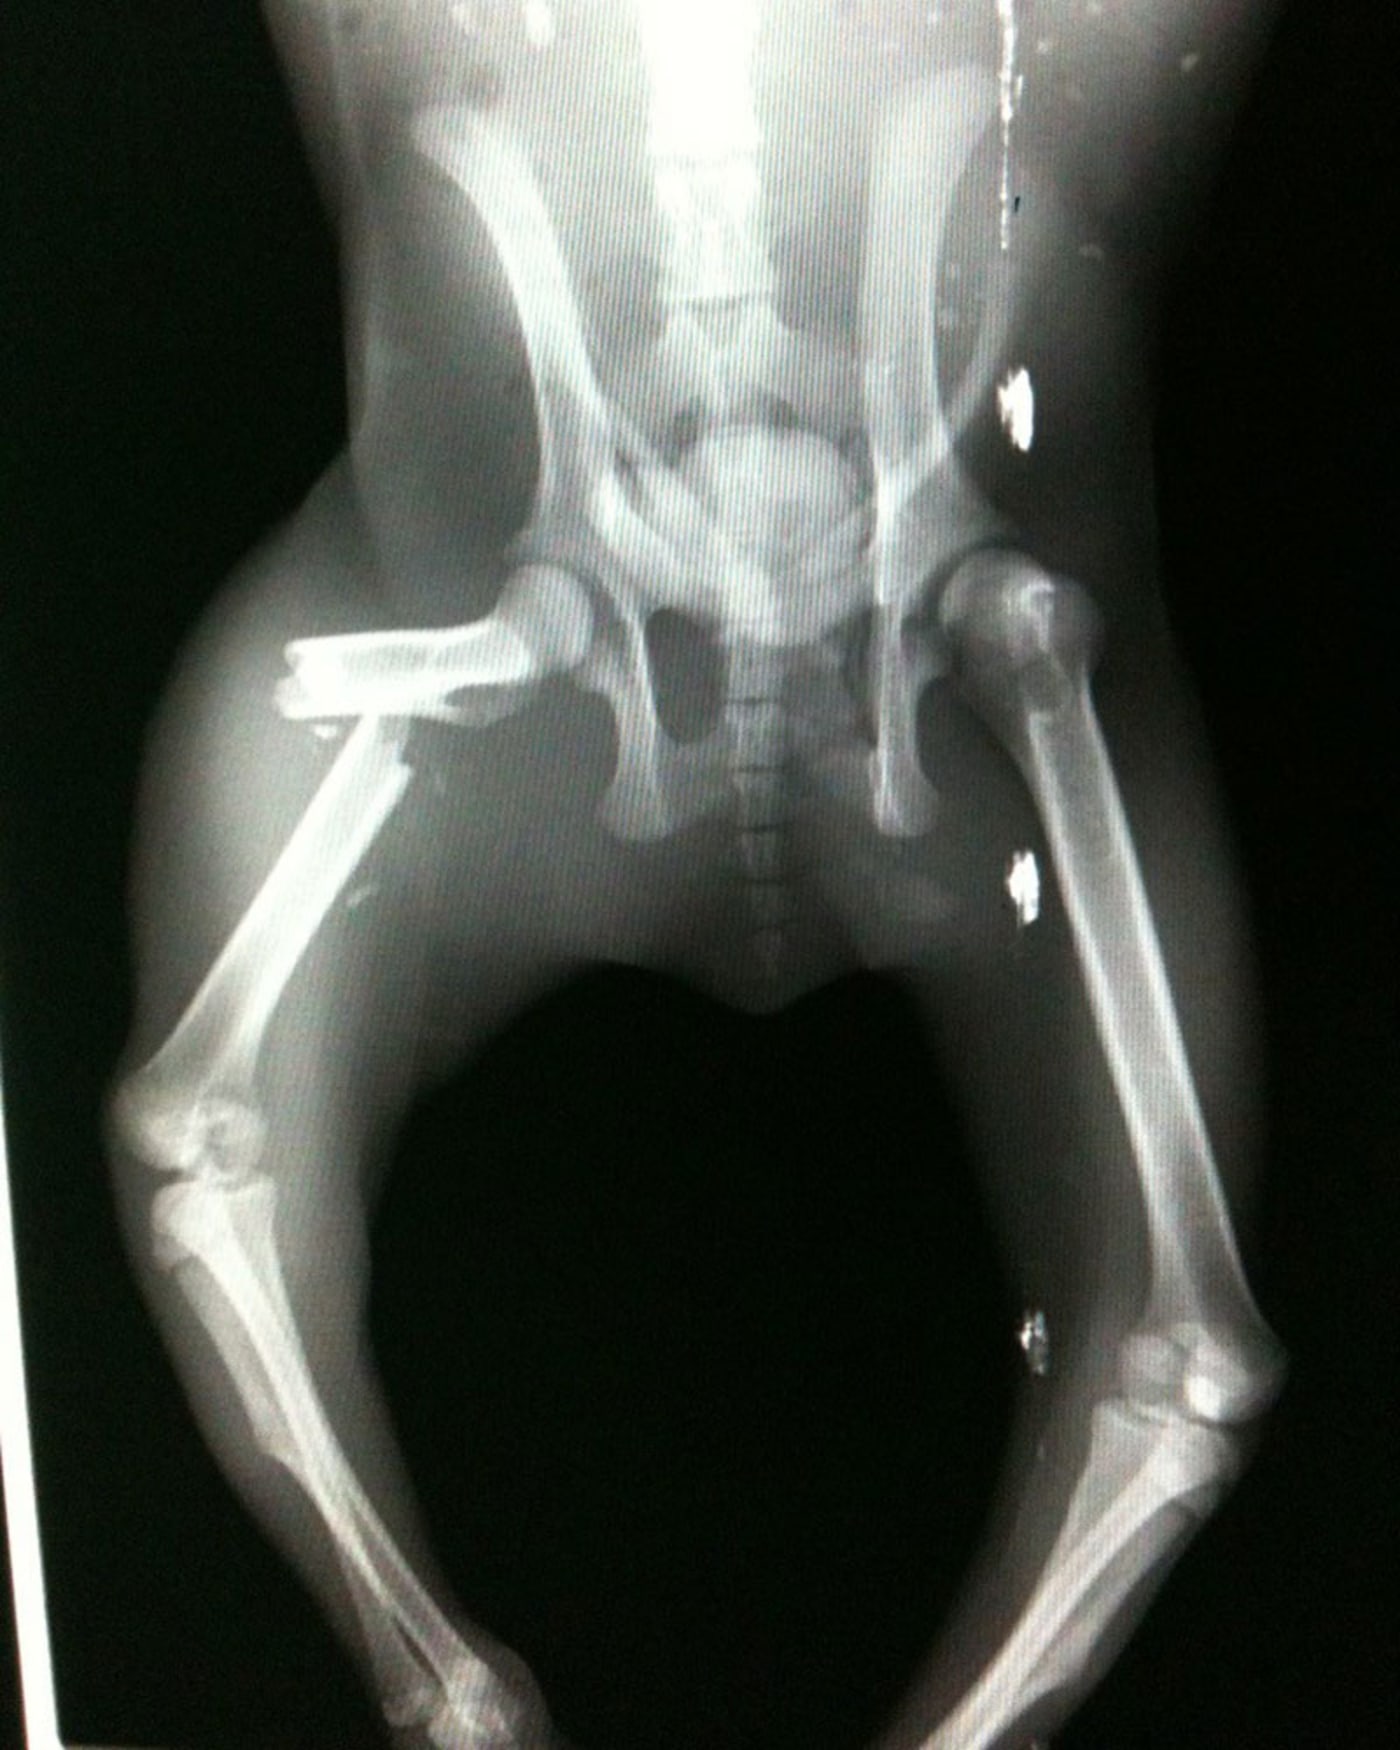 X-ray of koala with leg fracture from vehicle strike, southeast Queensland, April 2017. The koala was from the Moreton Bay region and had orthopaedic repairs on their broken limbs and was luckily able to be released